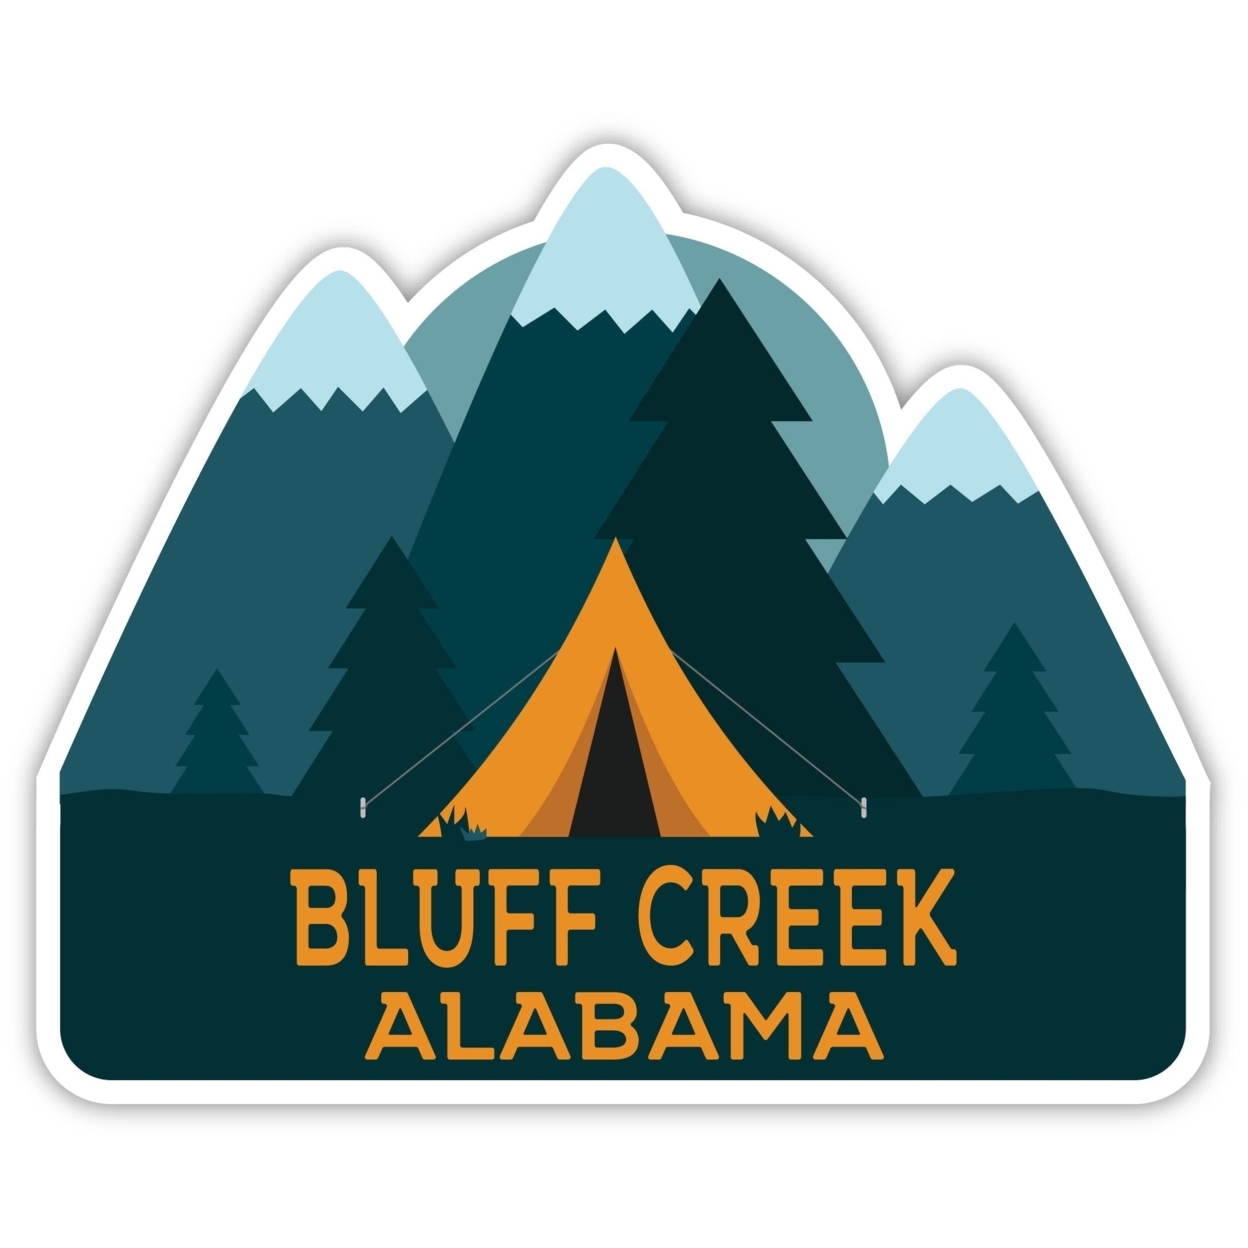 Bluff Creek Alabama Souvenir Decorative Stickers (Choose Theme And Size) - 4-Pack, 4-Inch, Tent